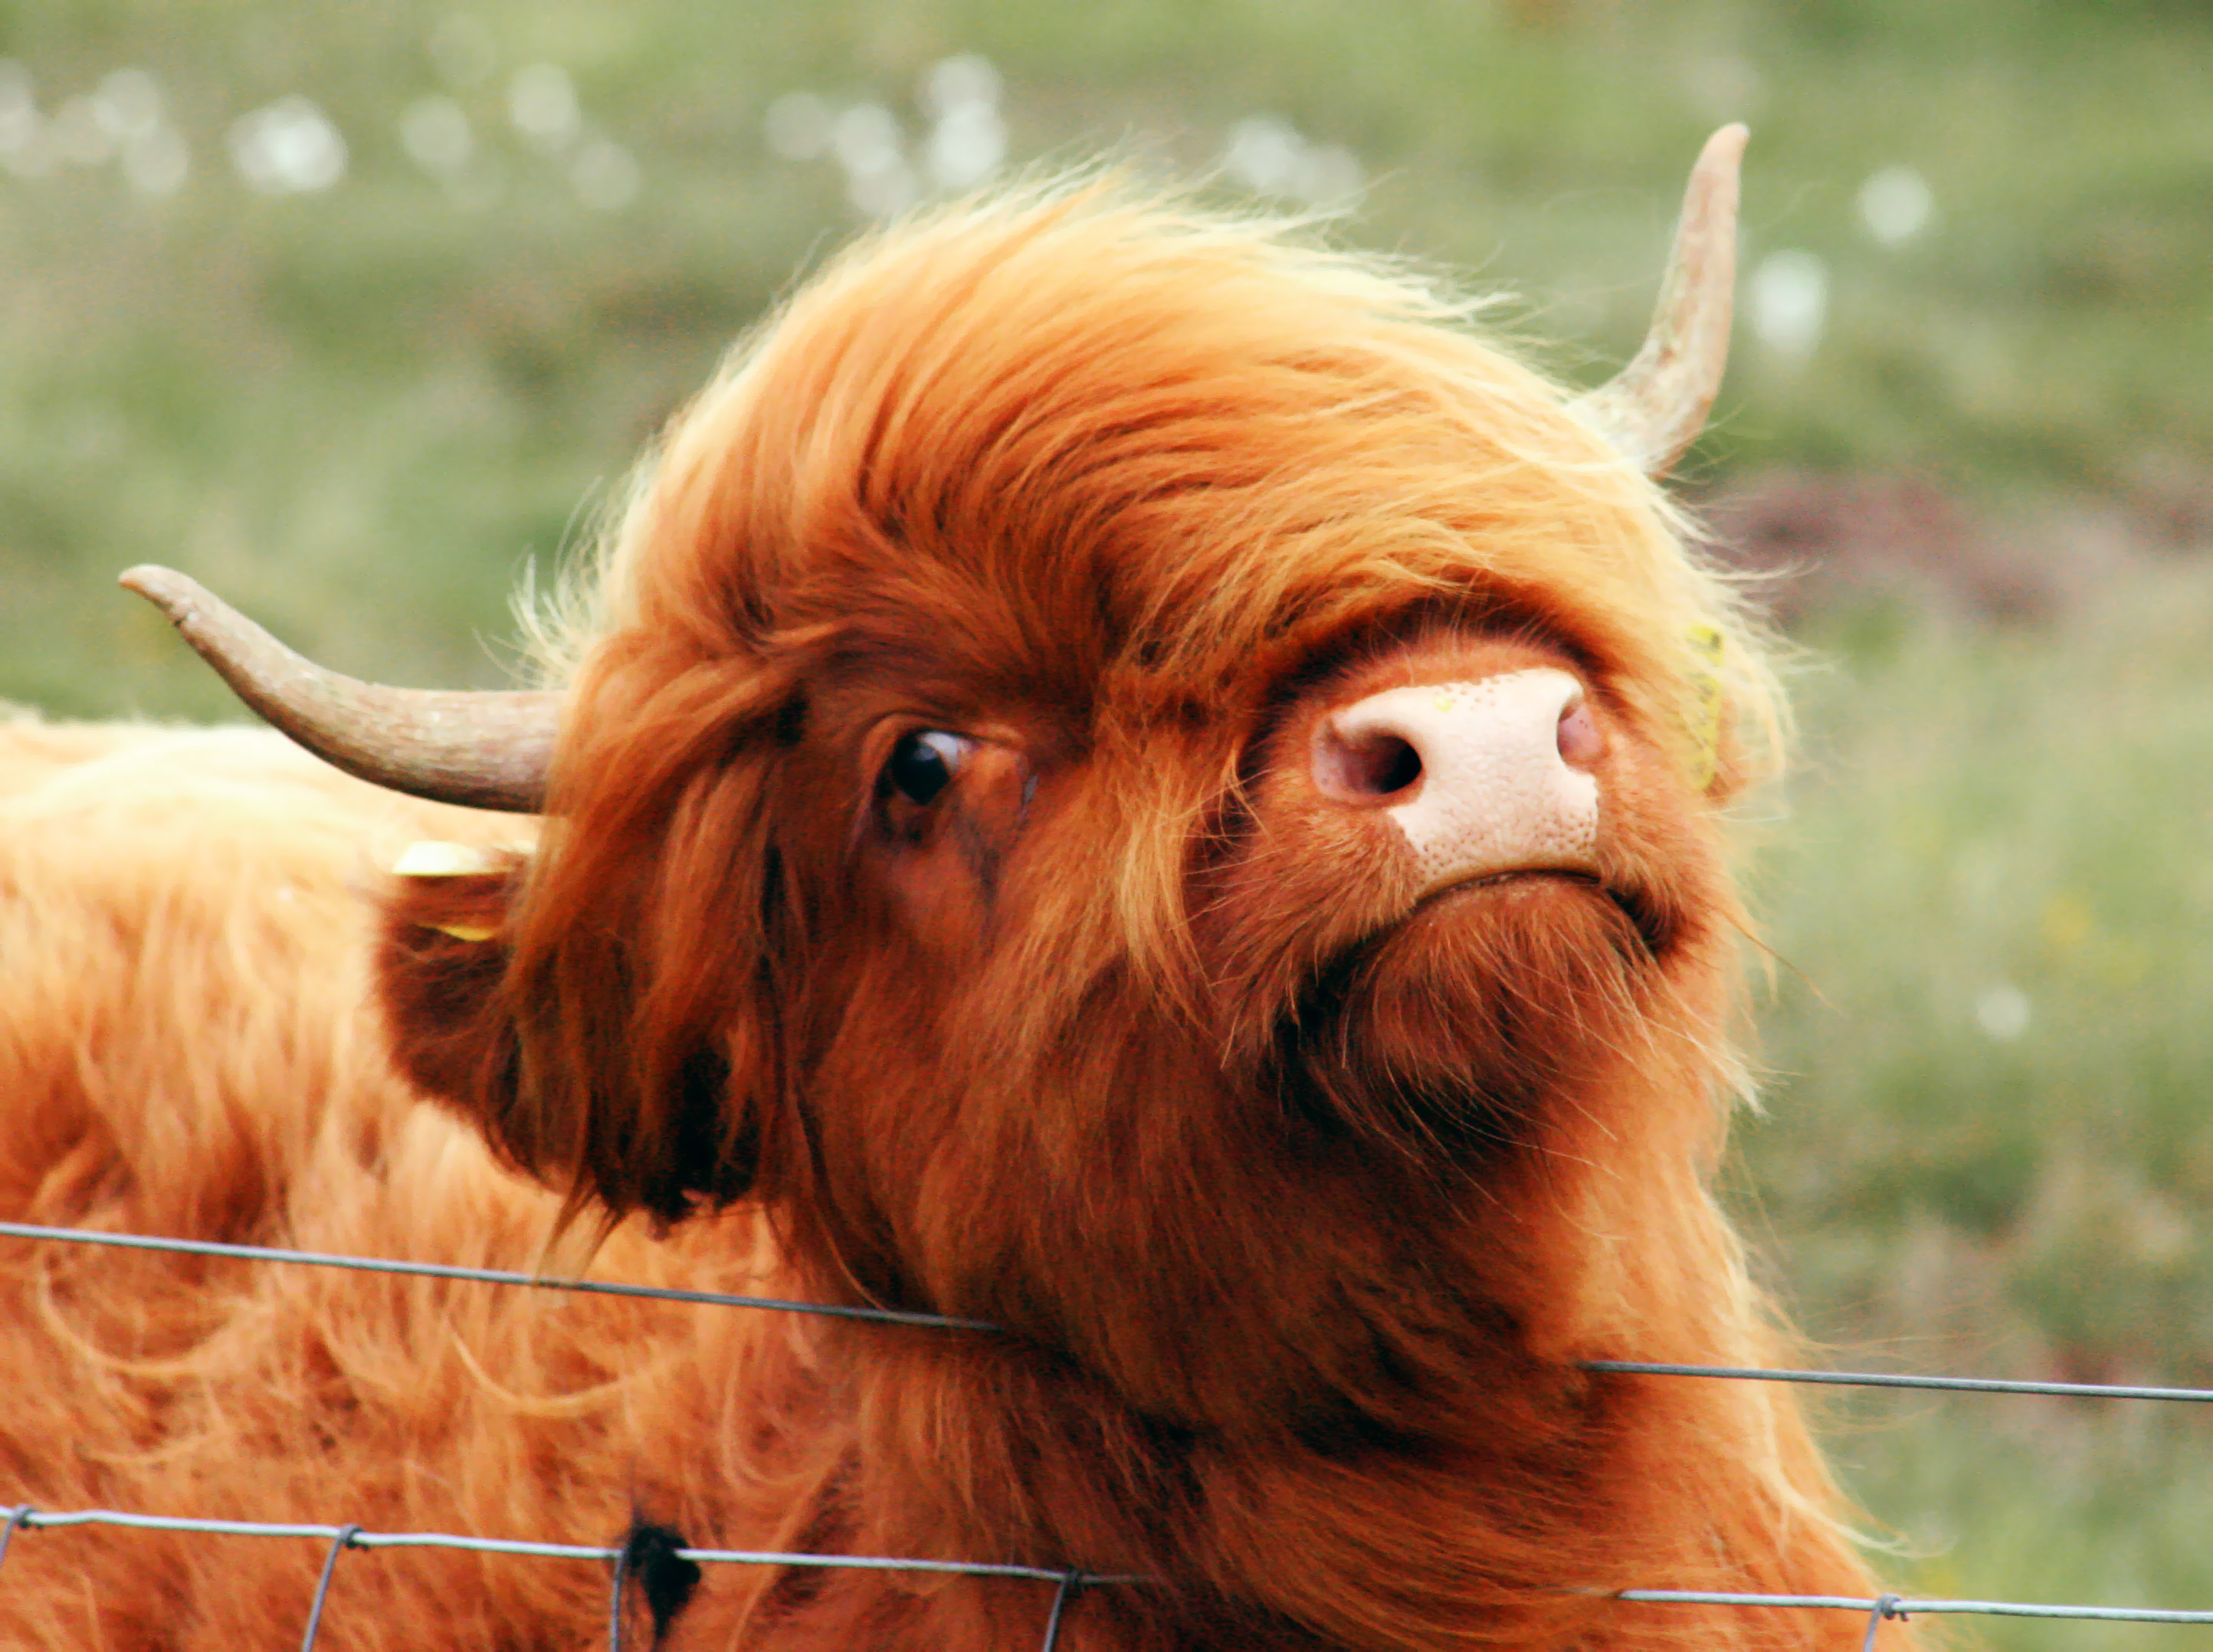 Image of possibly a highland cow with hair draped fashionably across the left side of its face.